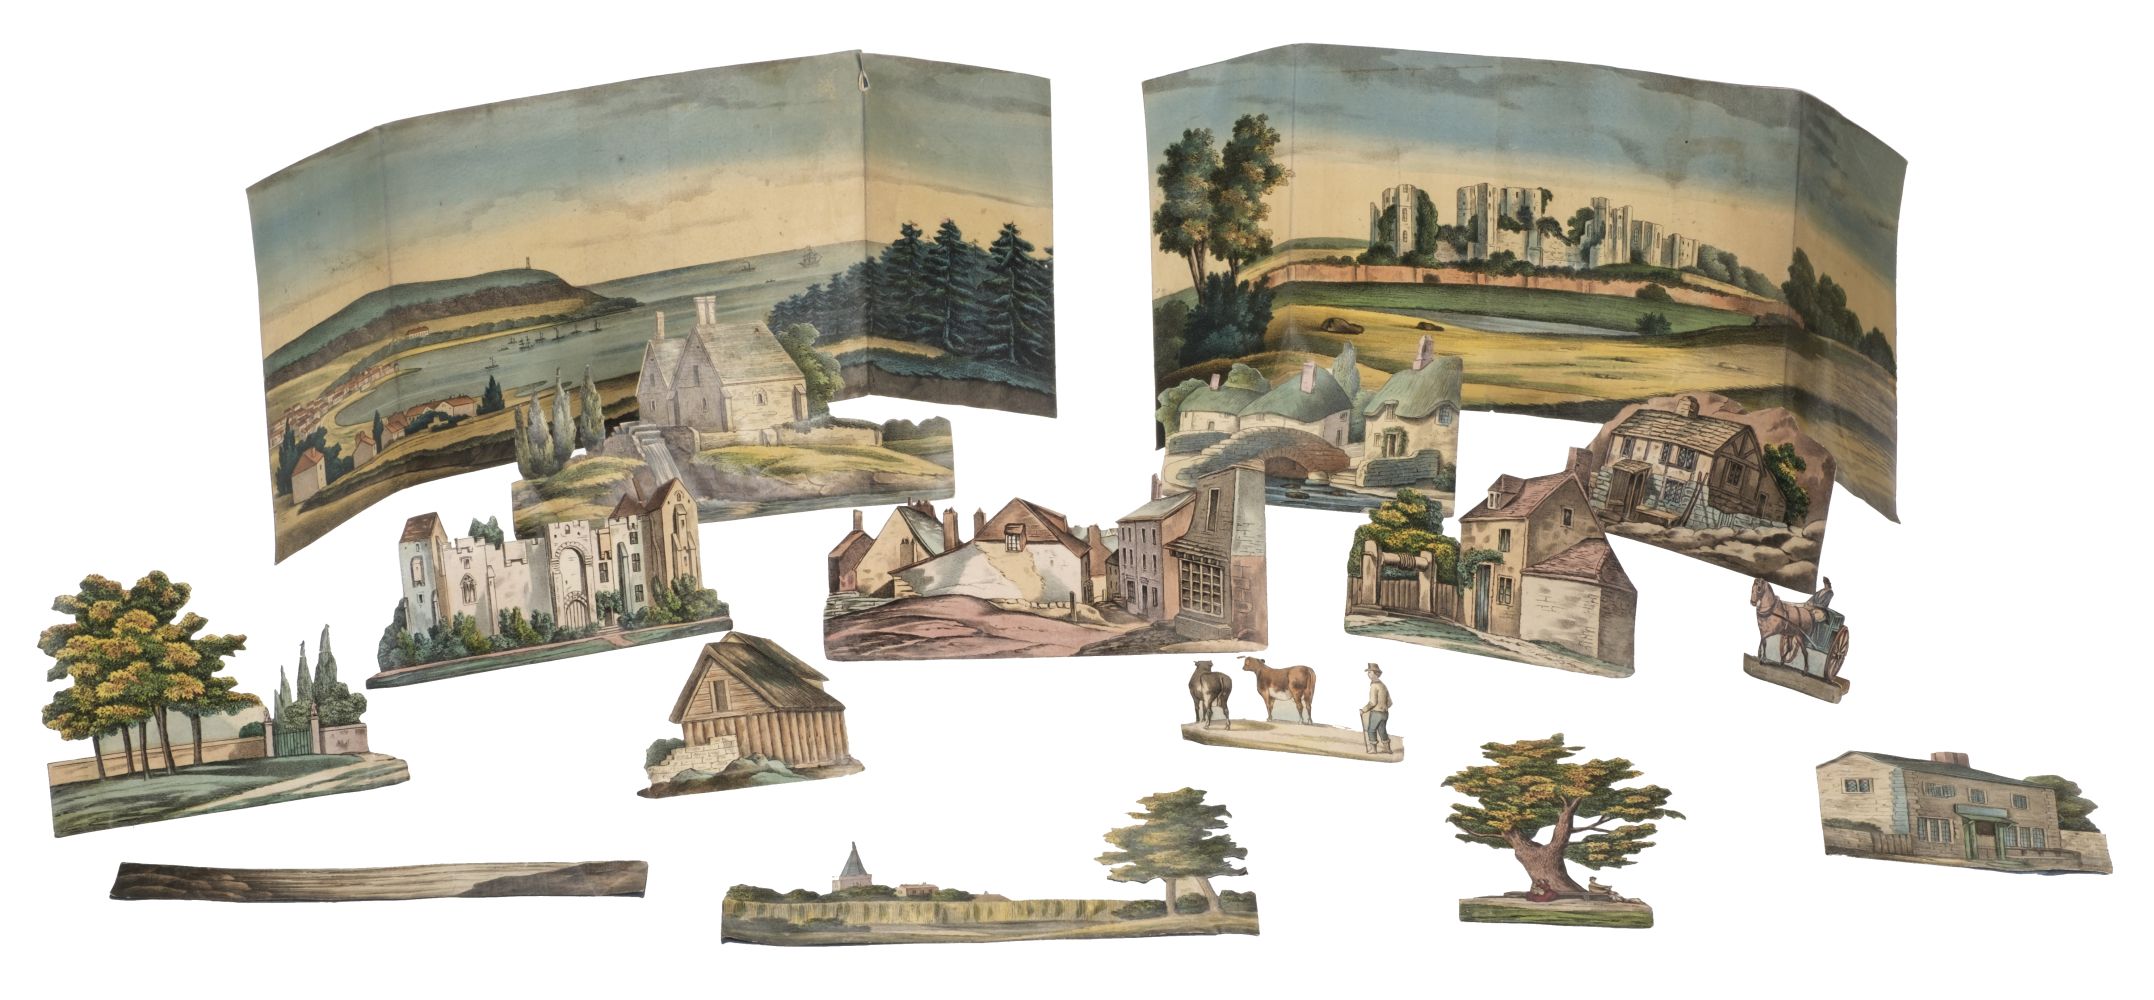 Miniature scenery. A collection of cut-out figures and 2 backdrops, circa 1870s